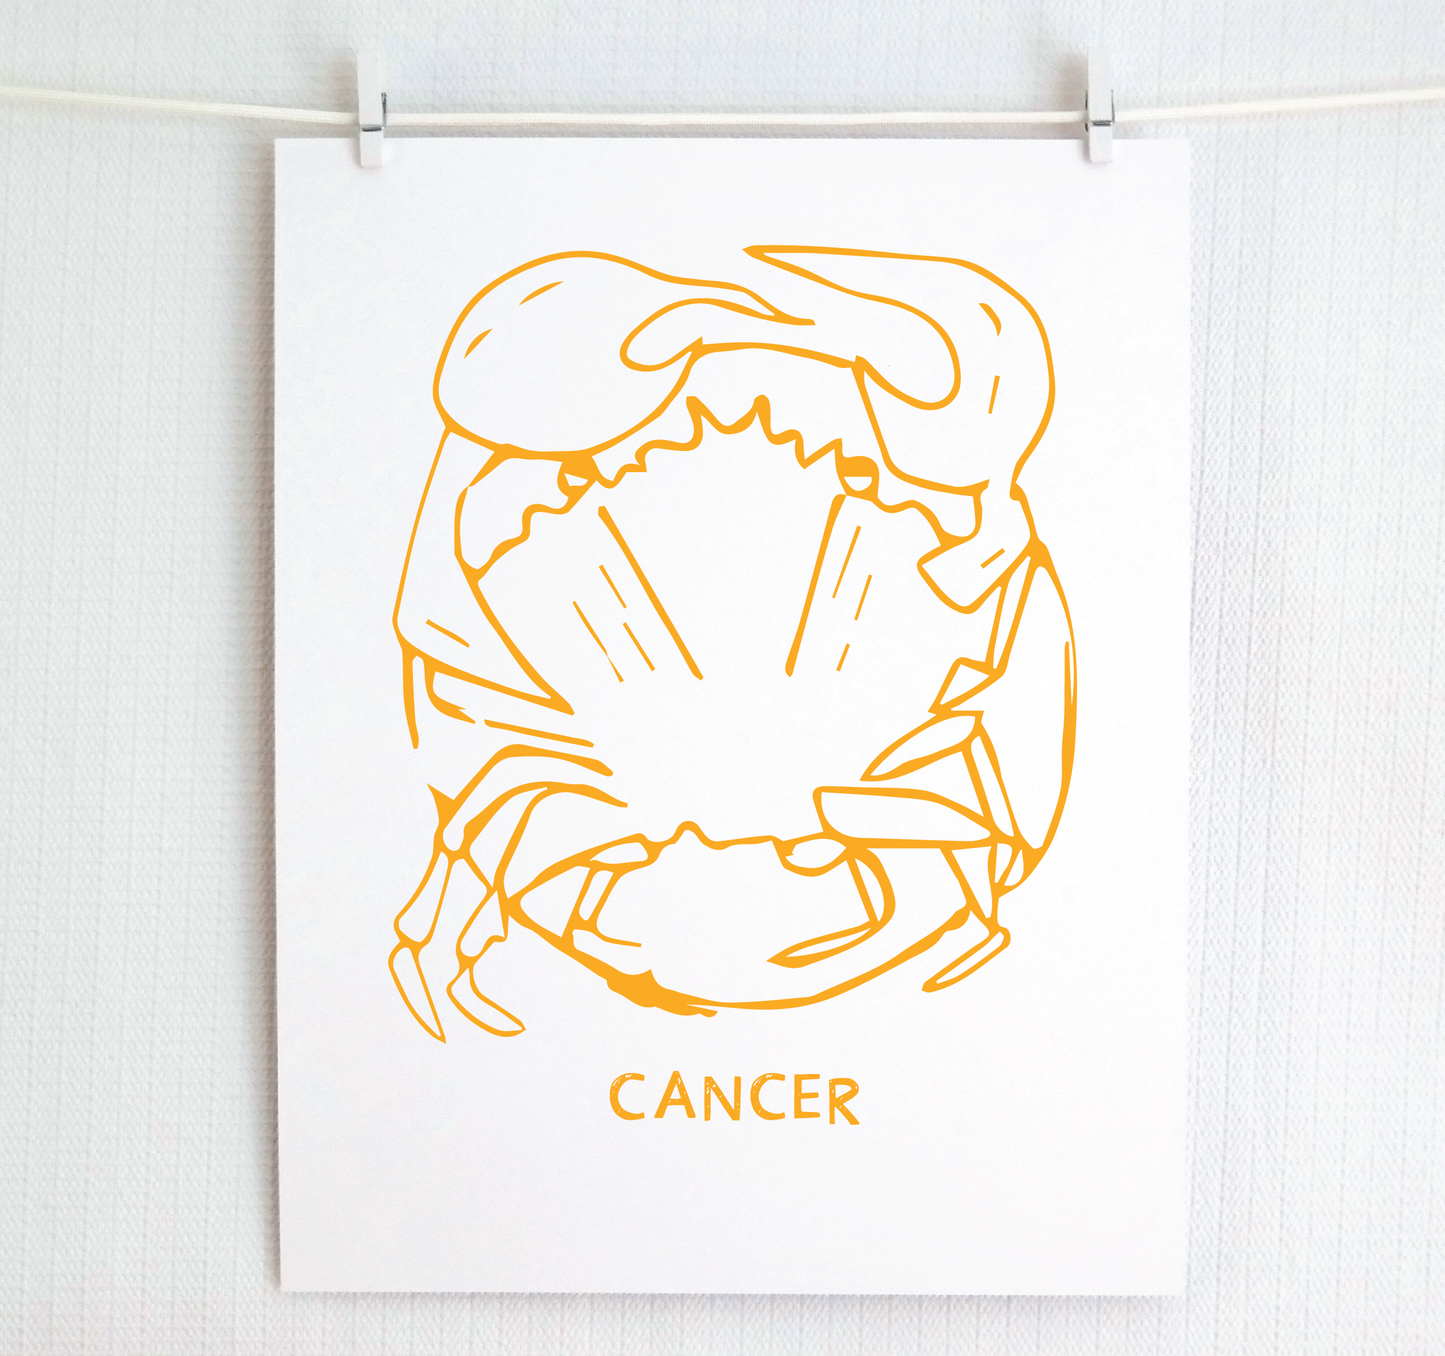 Signs of the Zodiac: CANCER